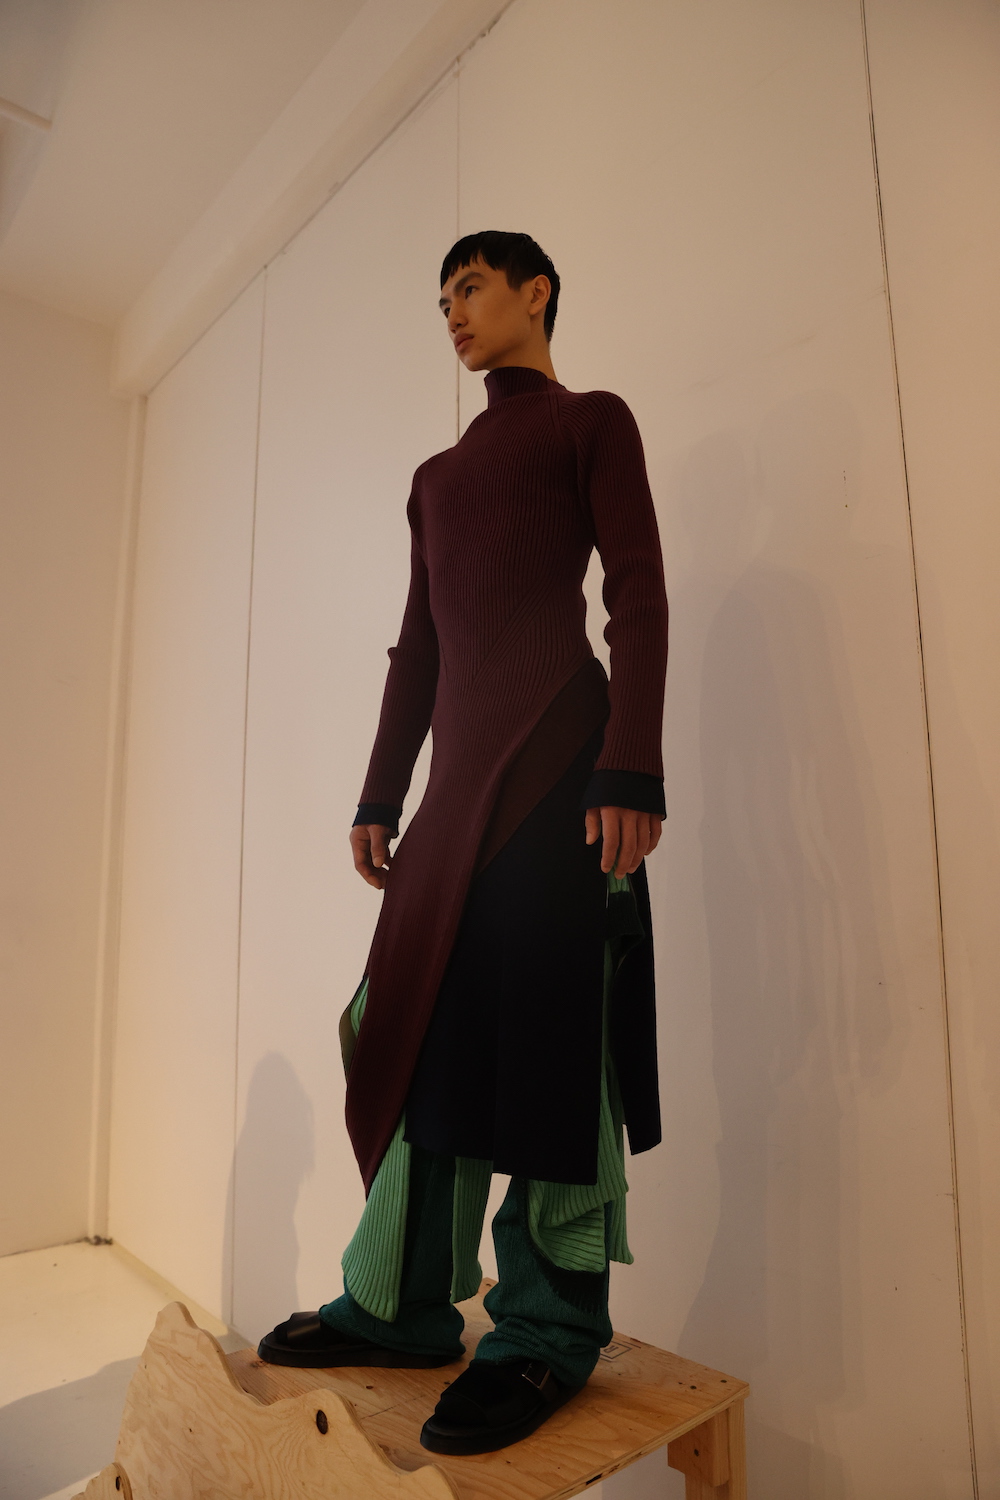 A model wearing a burgundy robe, green knitted pants and black sandals.